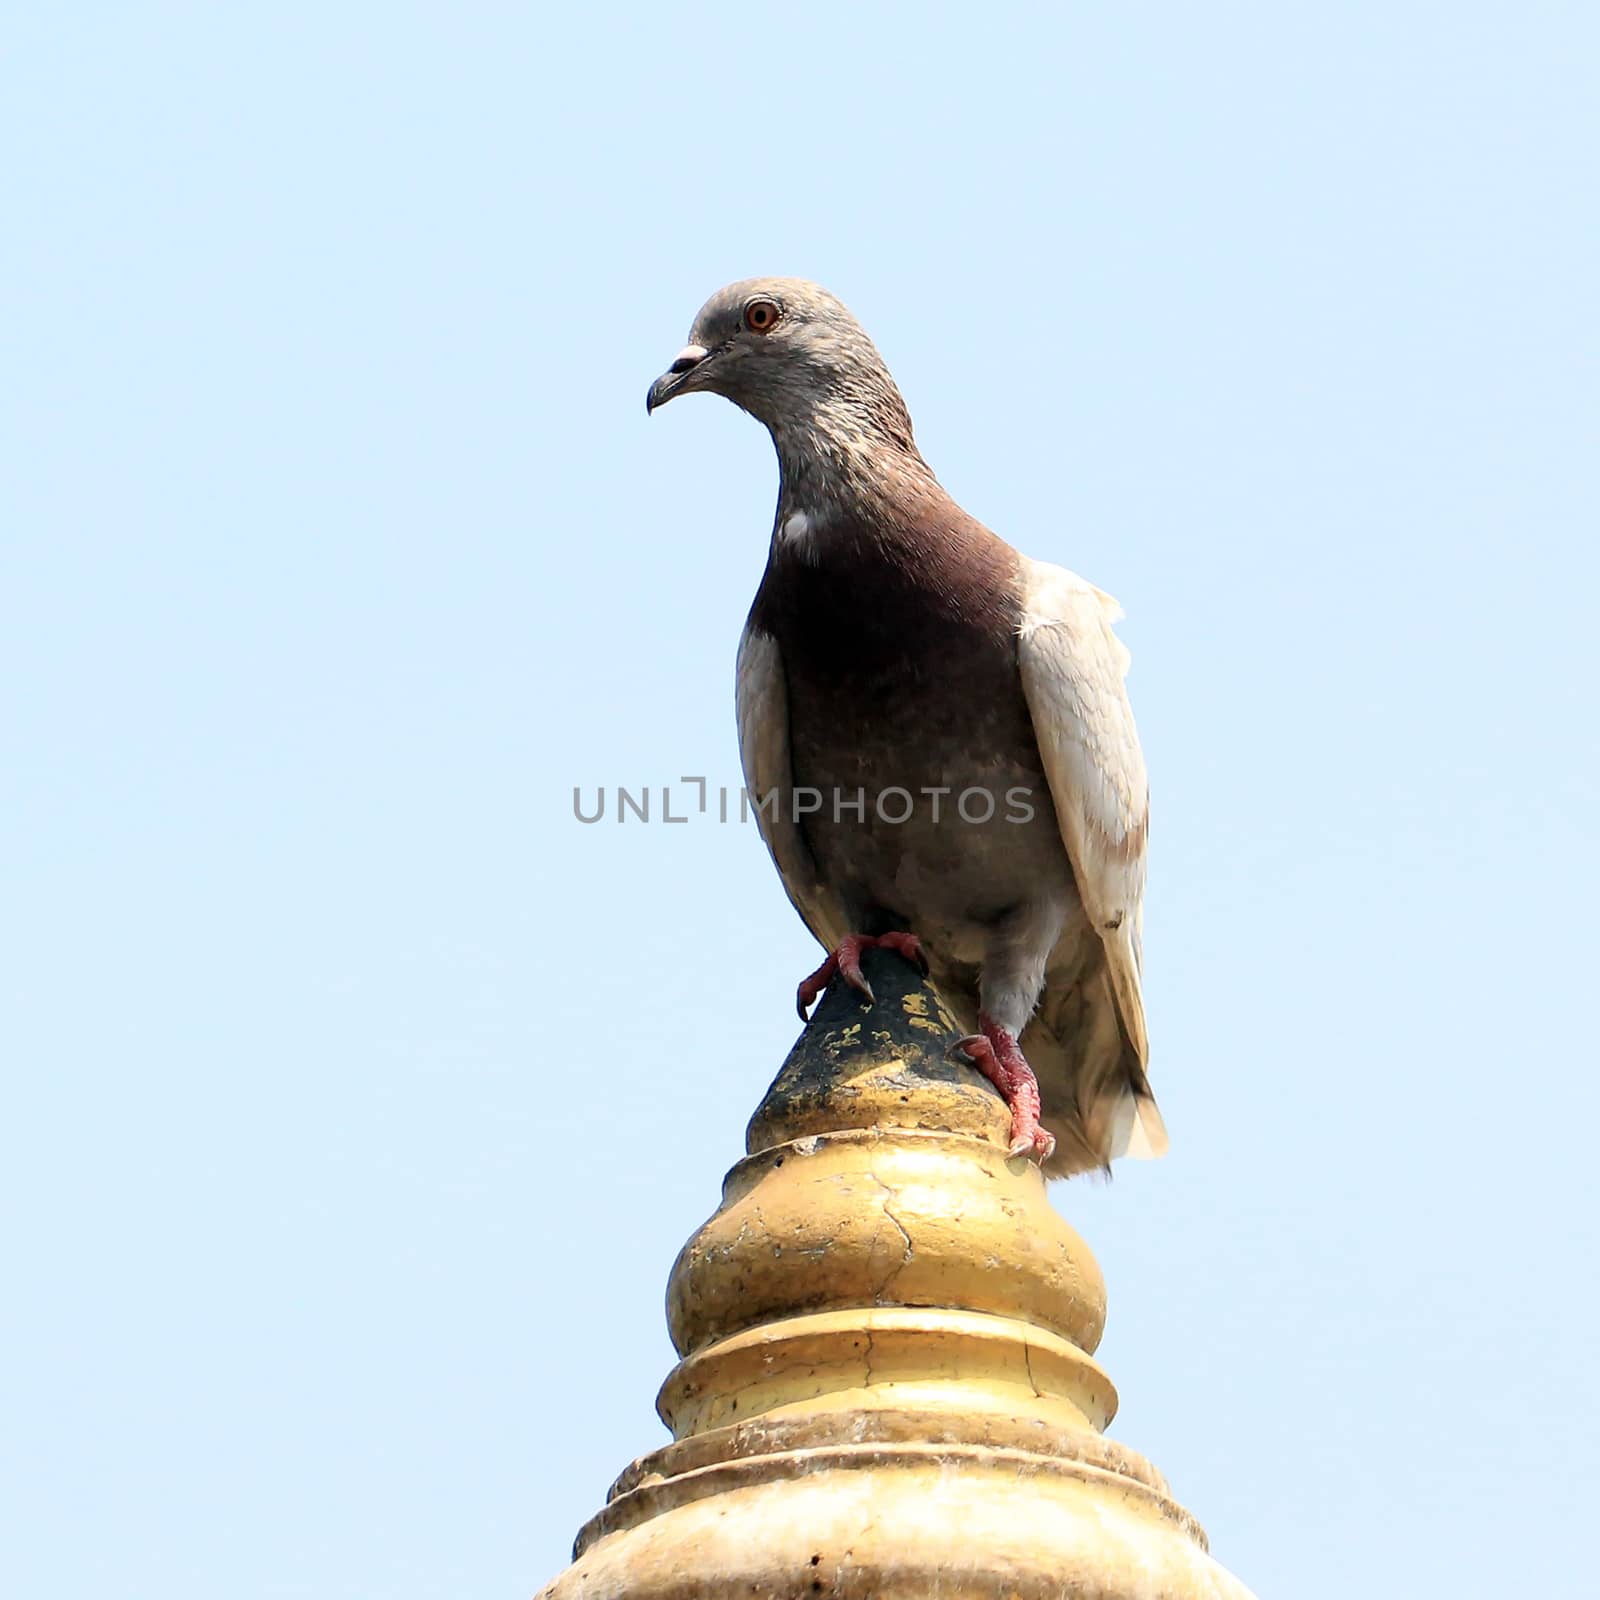 dove sitting on a pole with sky background